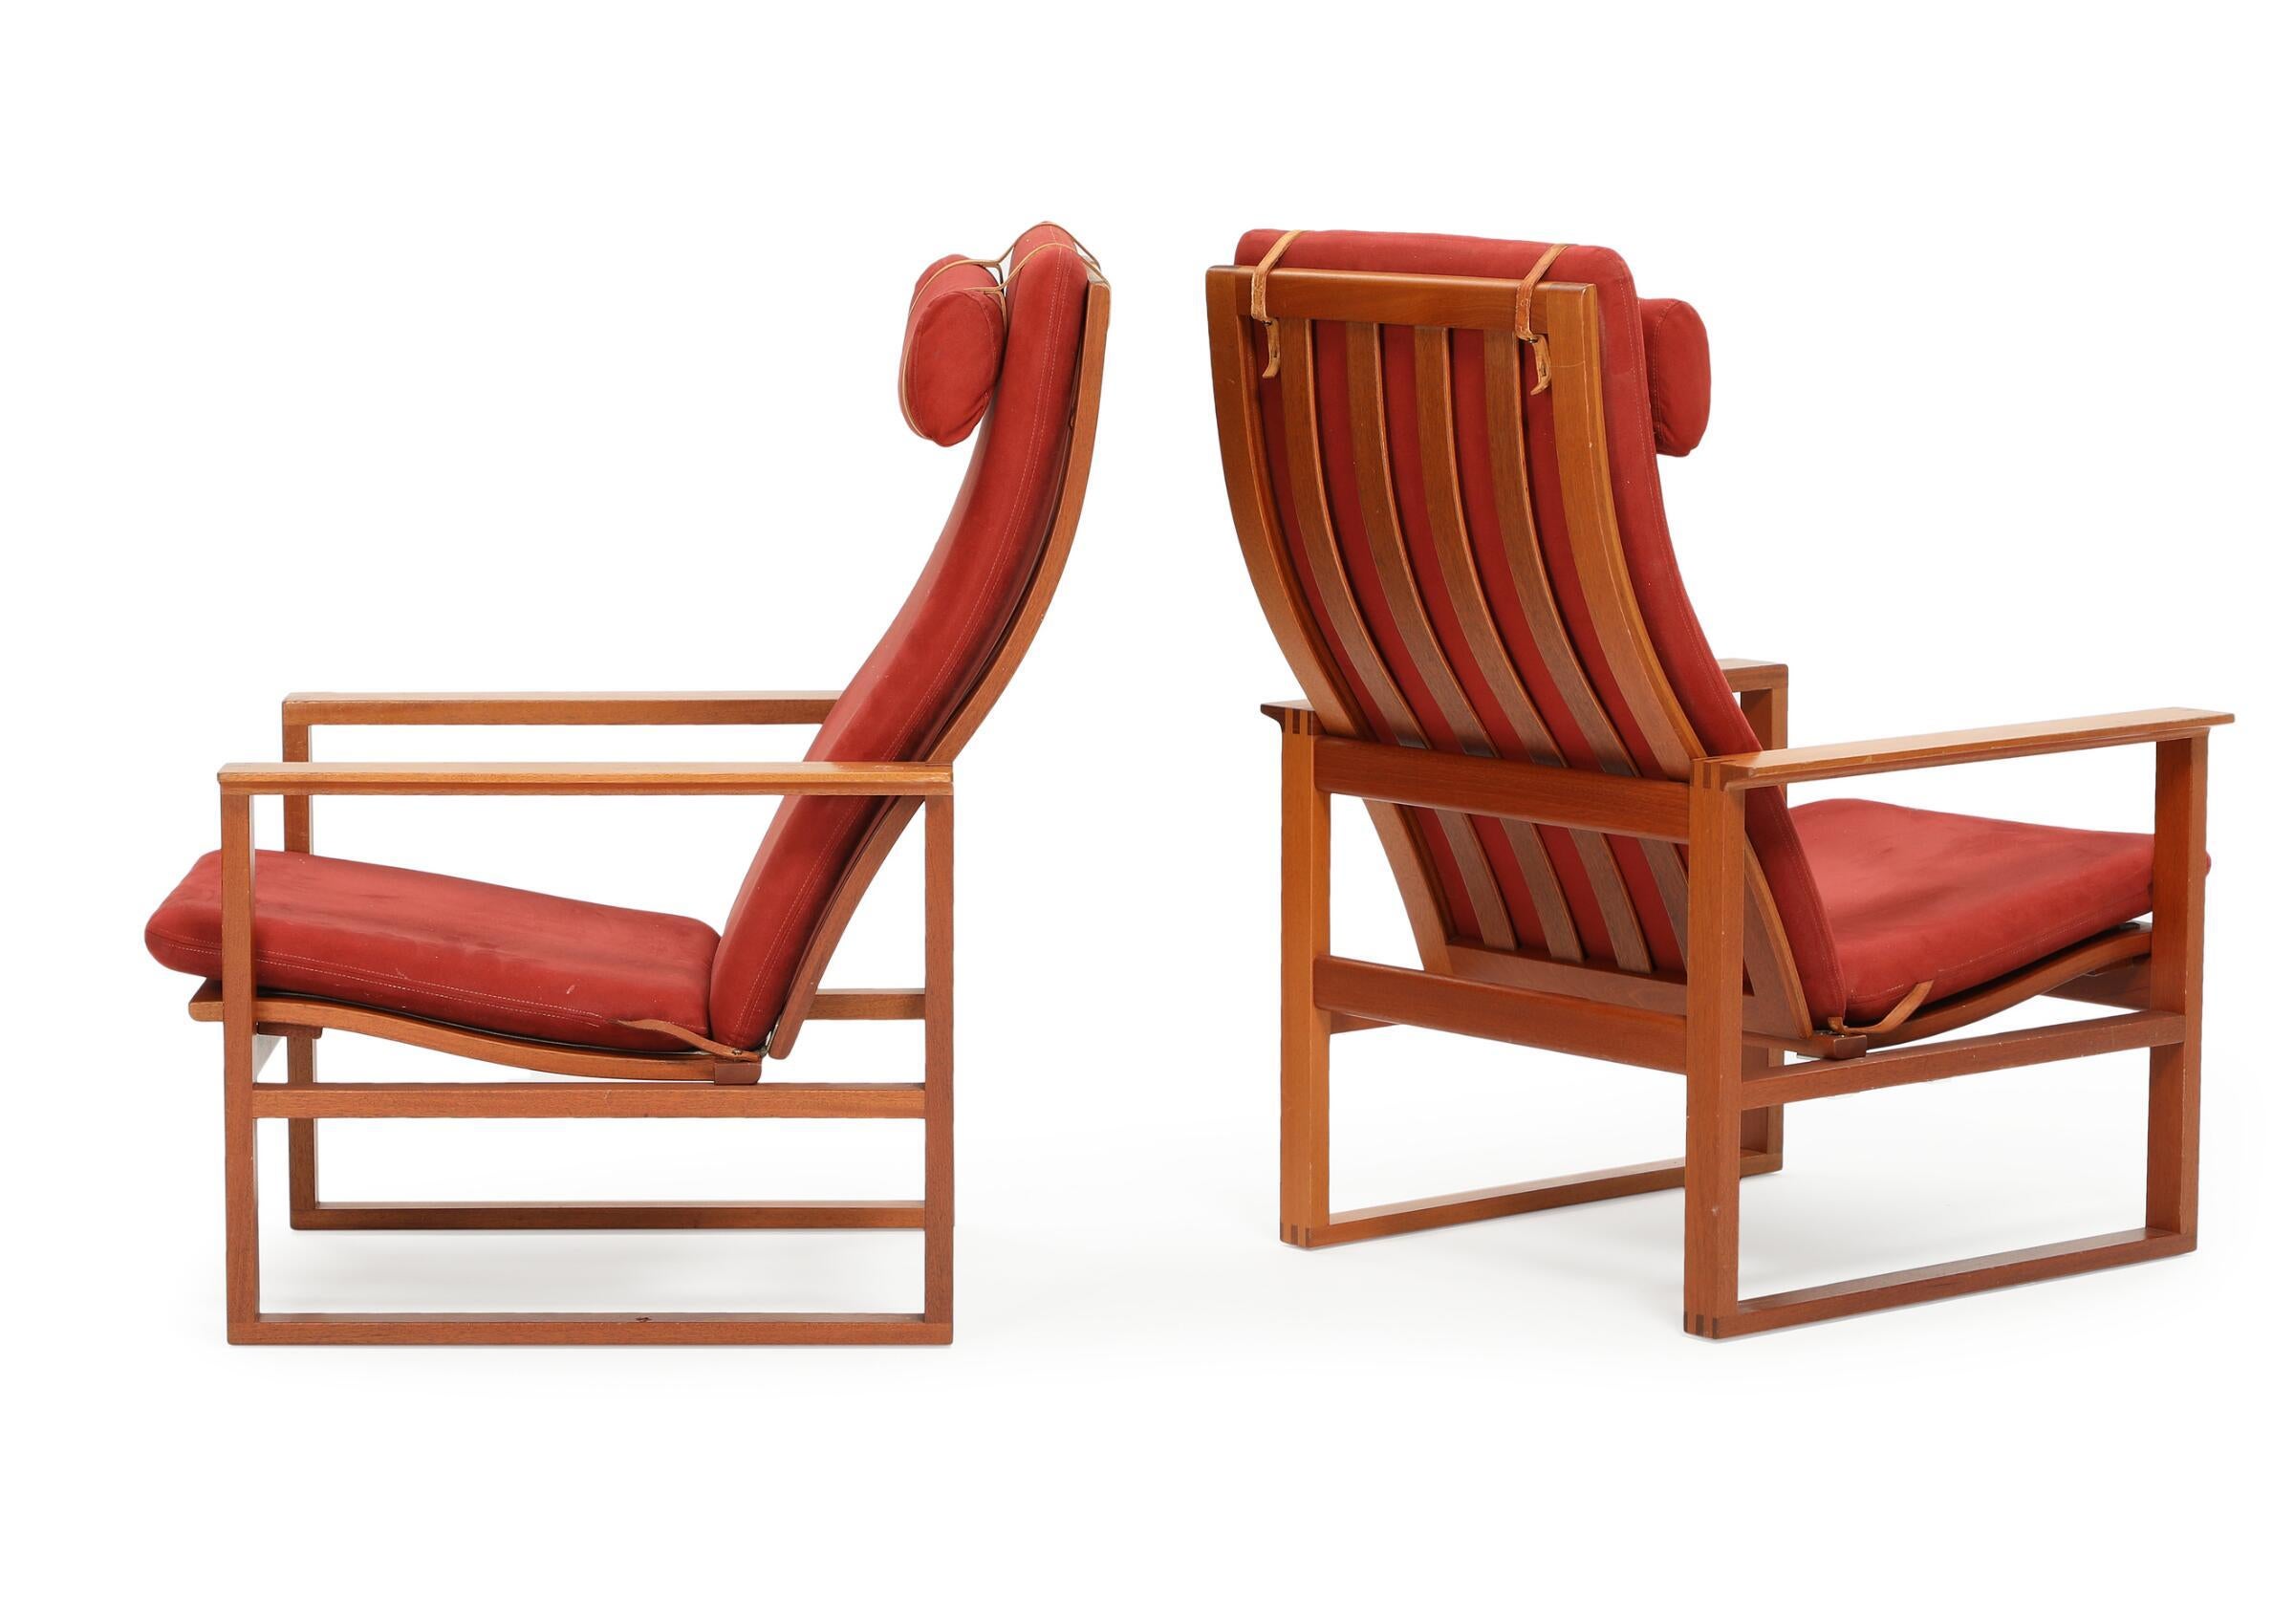 Børge Mogensen: “The Runner Chair”. A pair of high-backed mahogany with adjustable back. Loose cushions upholstered with red alcantara. Model 2254. Designed 1956–57. Manufactured and partly marked by Fredericia Stolefabrik.

Wear due to age and